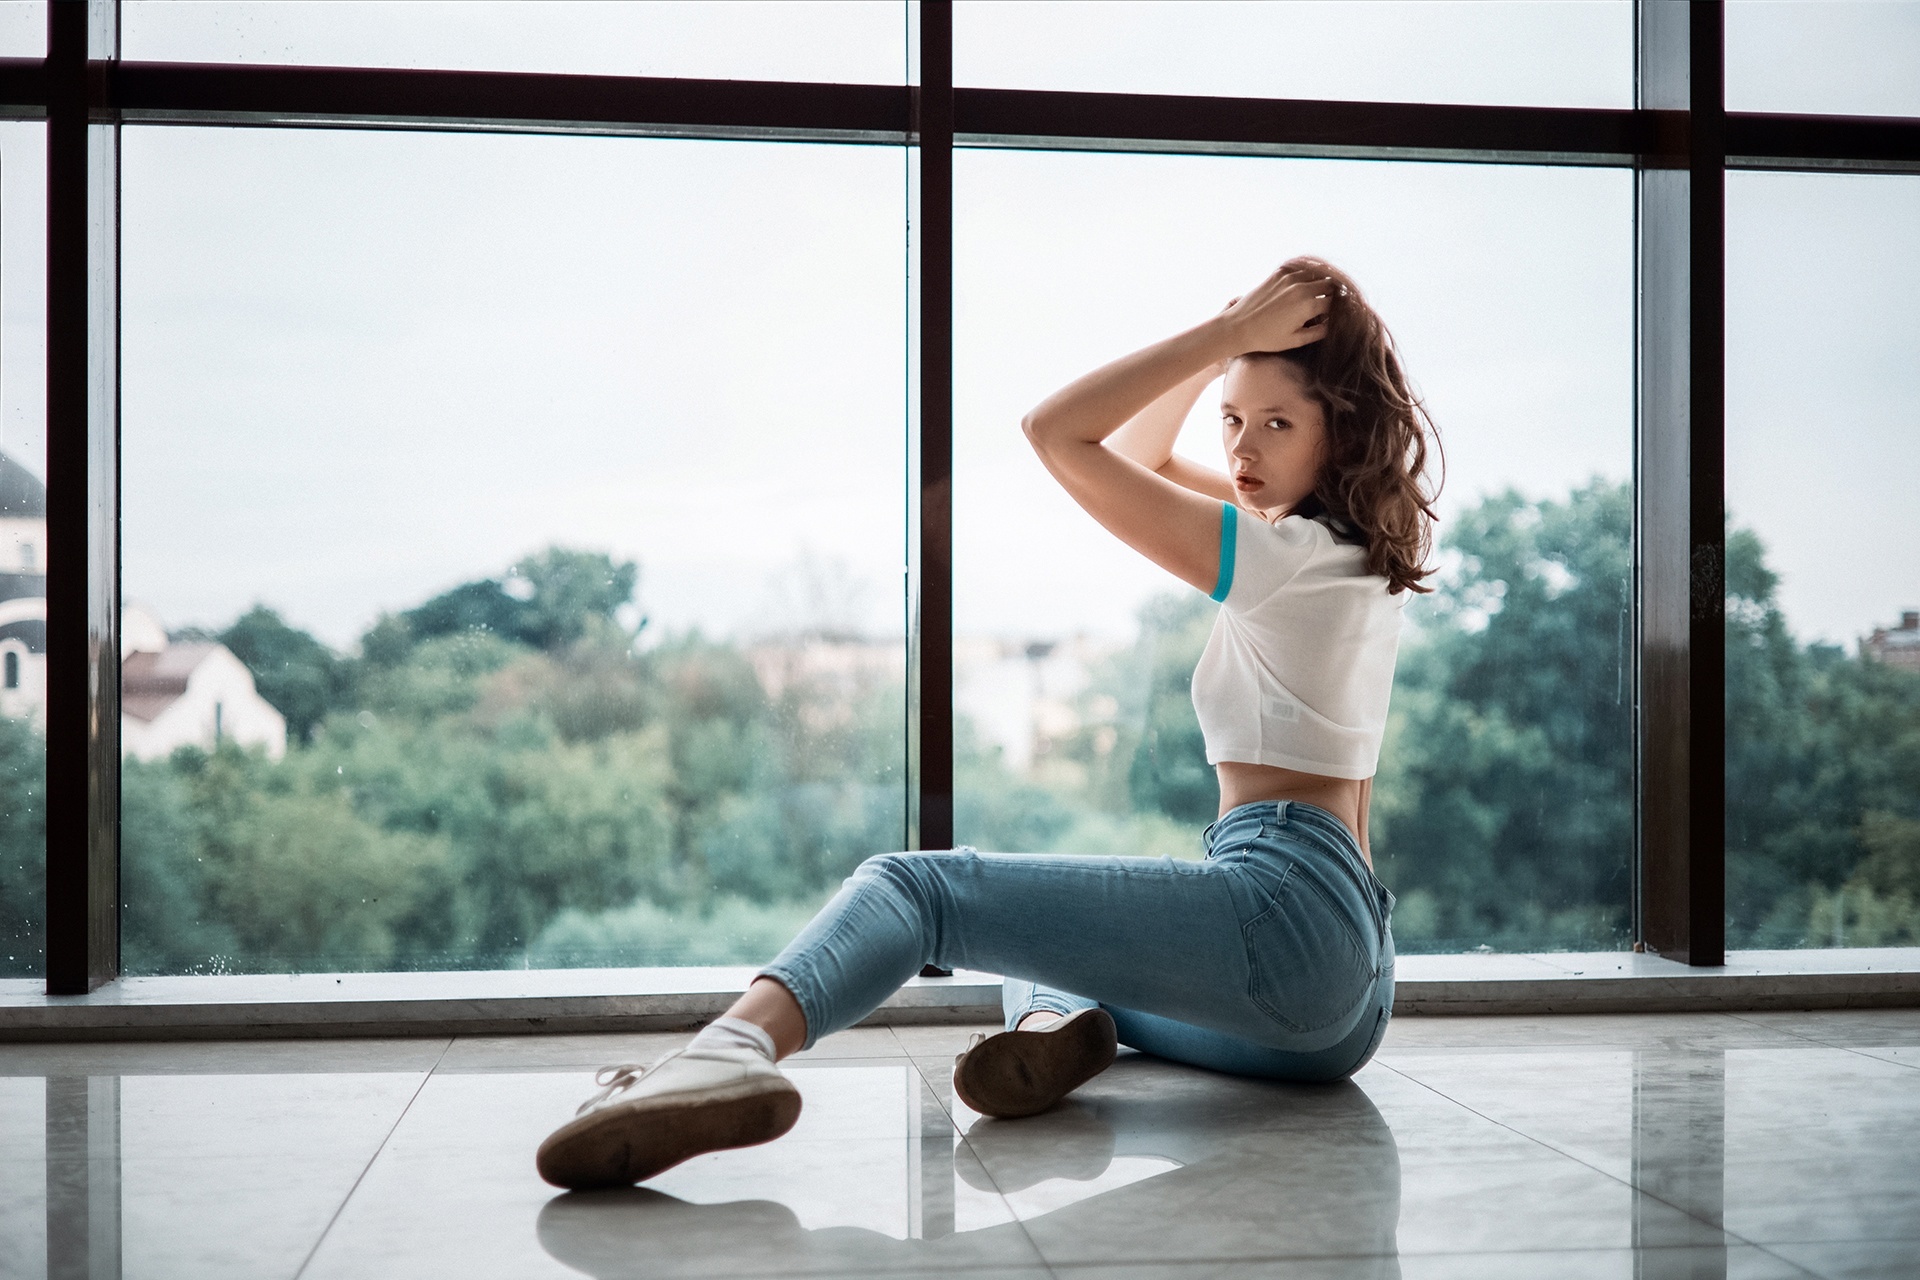 Model Red Lipstick White Tops Hands In Hair Jeans Shoes Sitting On The Floor By The Window Women T S 1920x1280